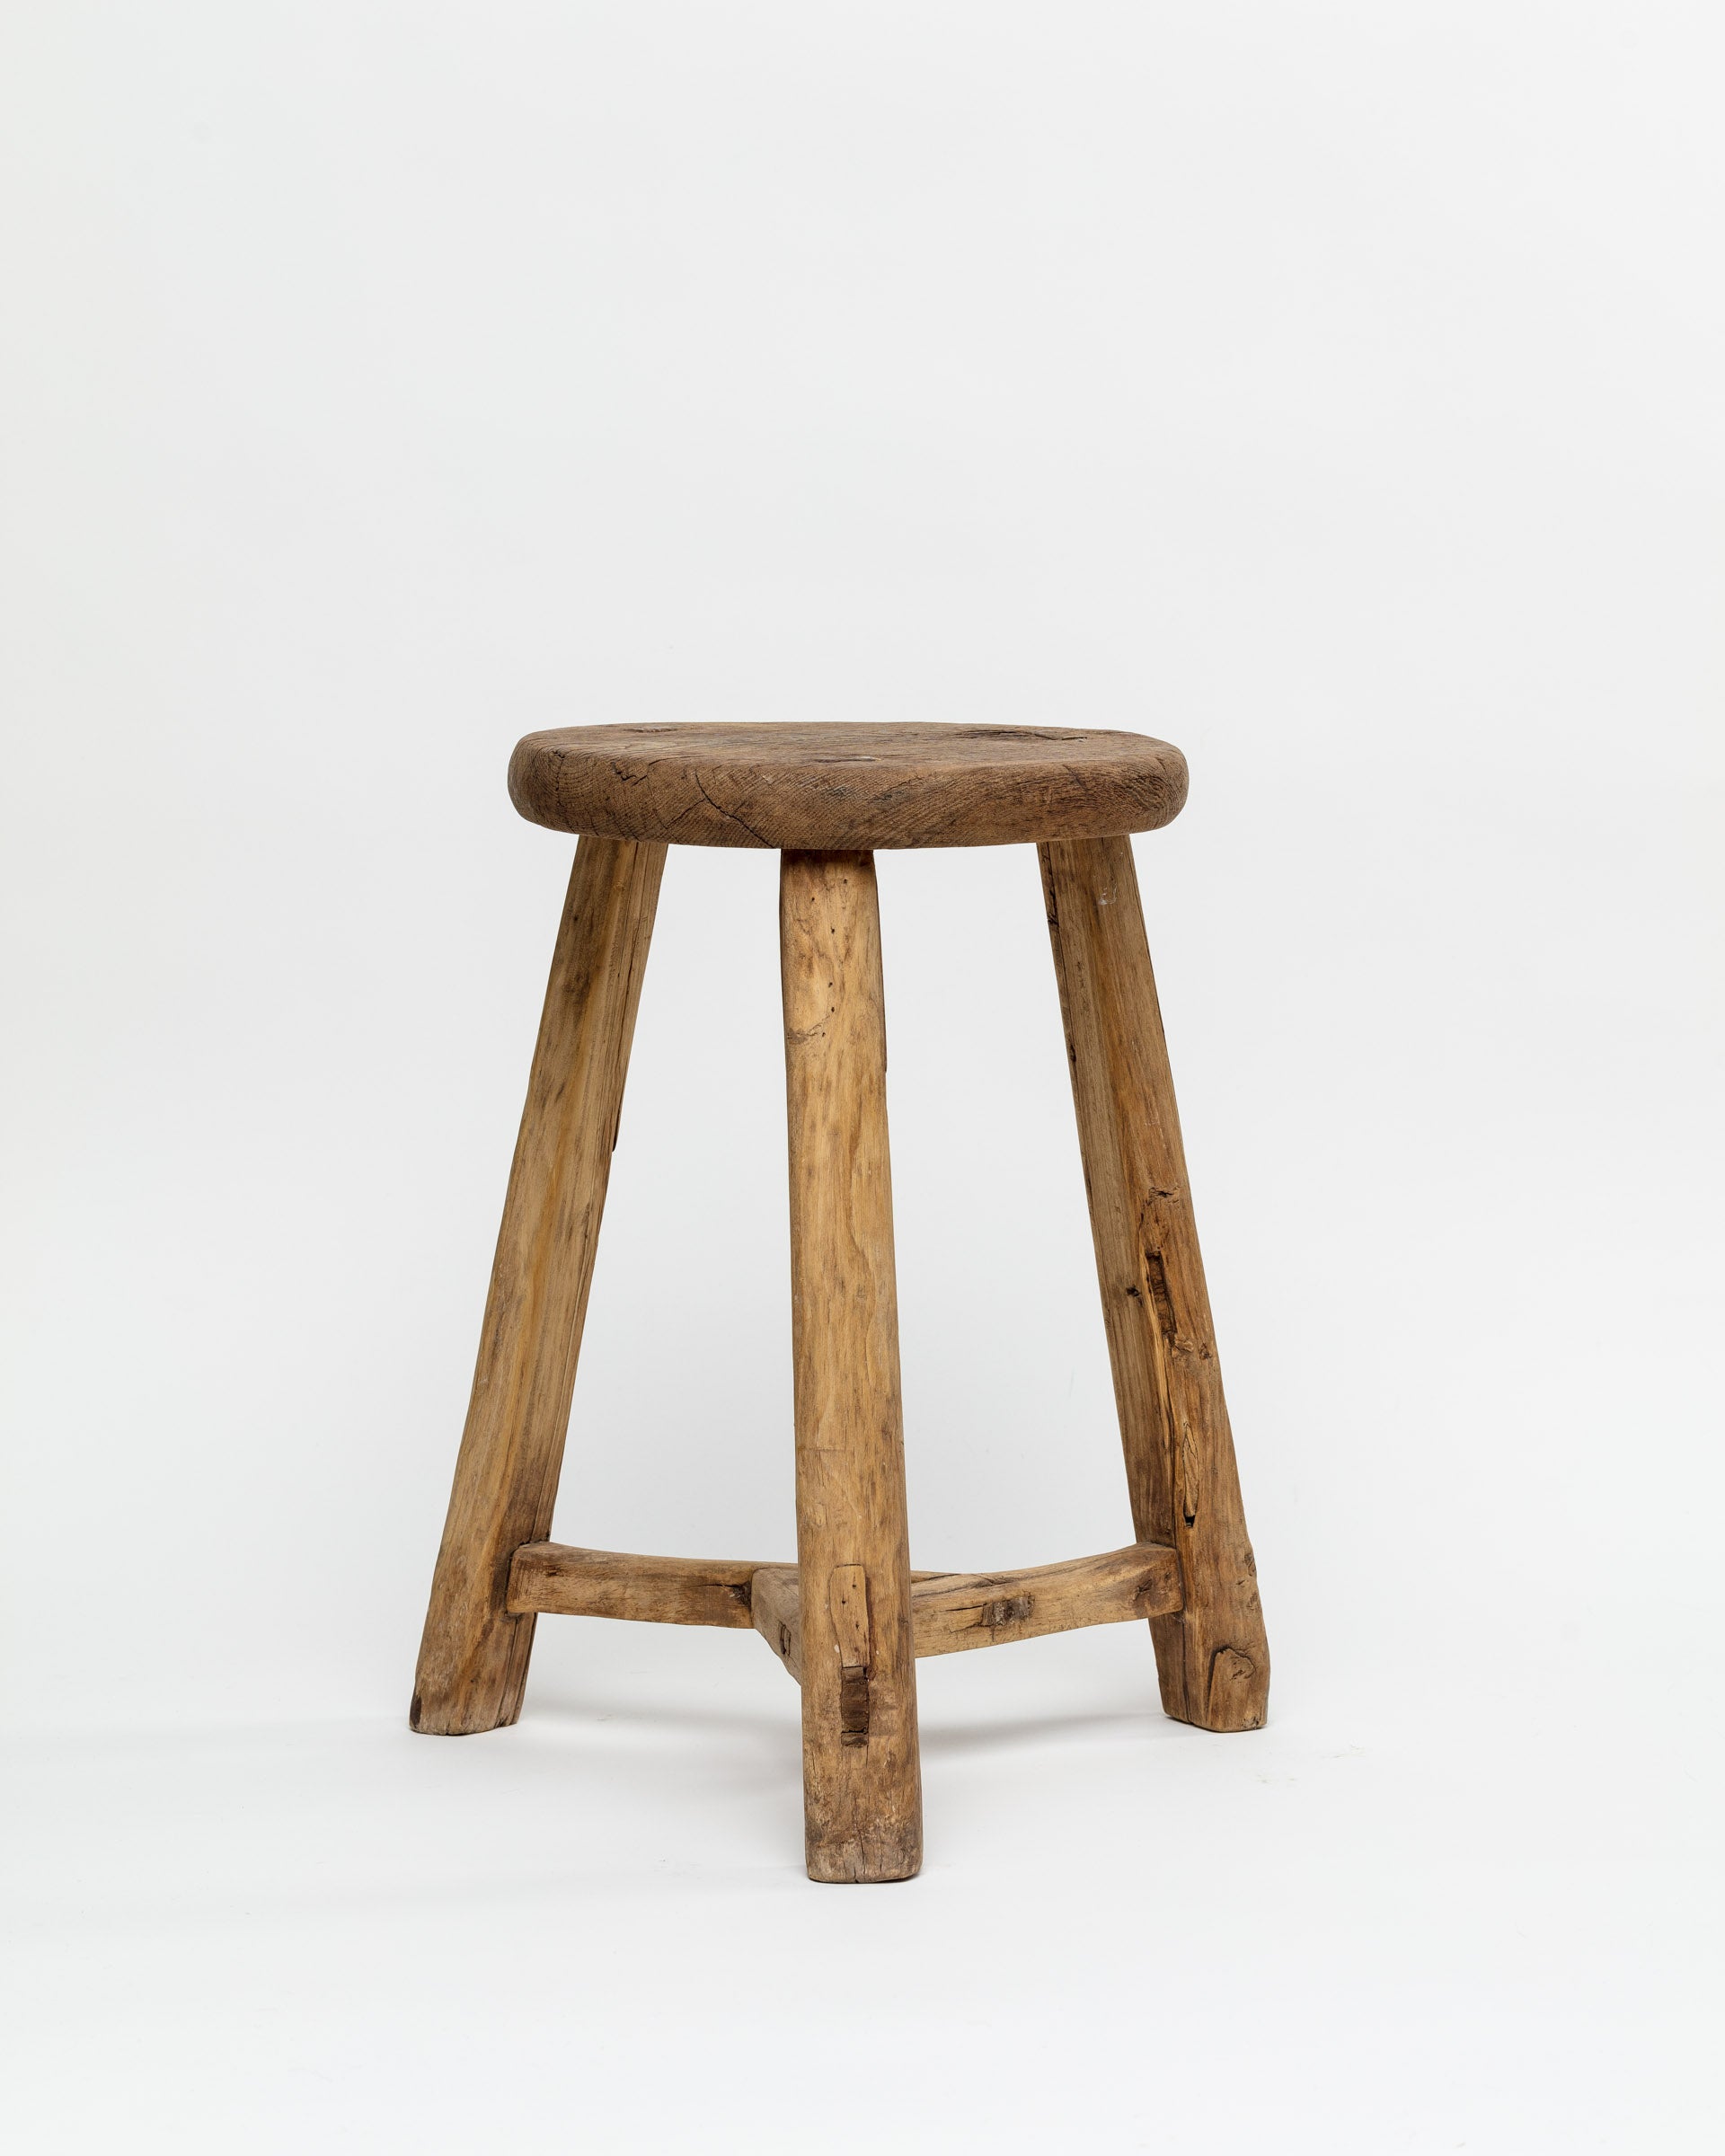 A ROUND STOOL 48 from Indus Design Imports, with a round top and three legs, sourced from Scottsdale, Arizona, set against a plain white background. The wood has a weathered appearance, indicating age or frequent use.